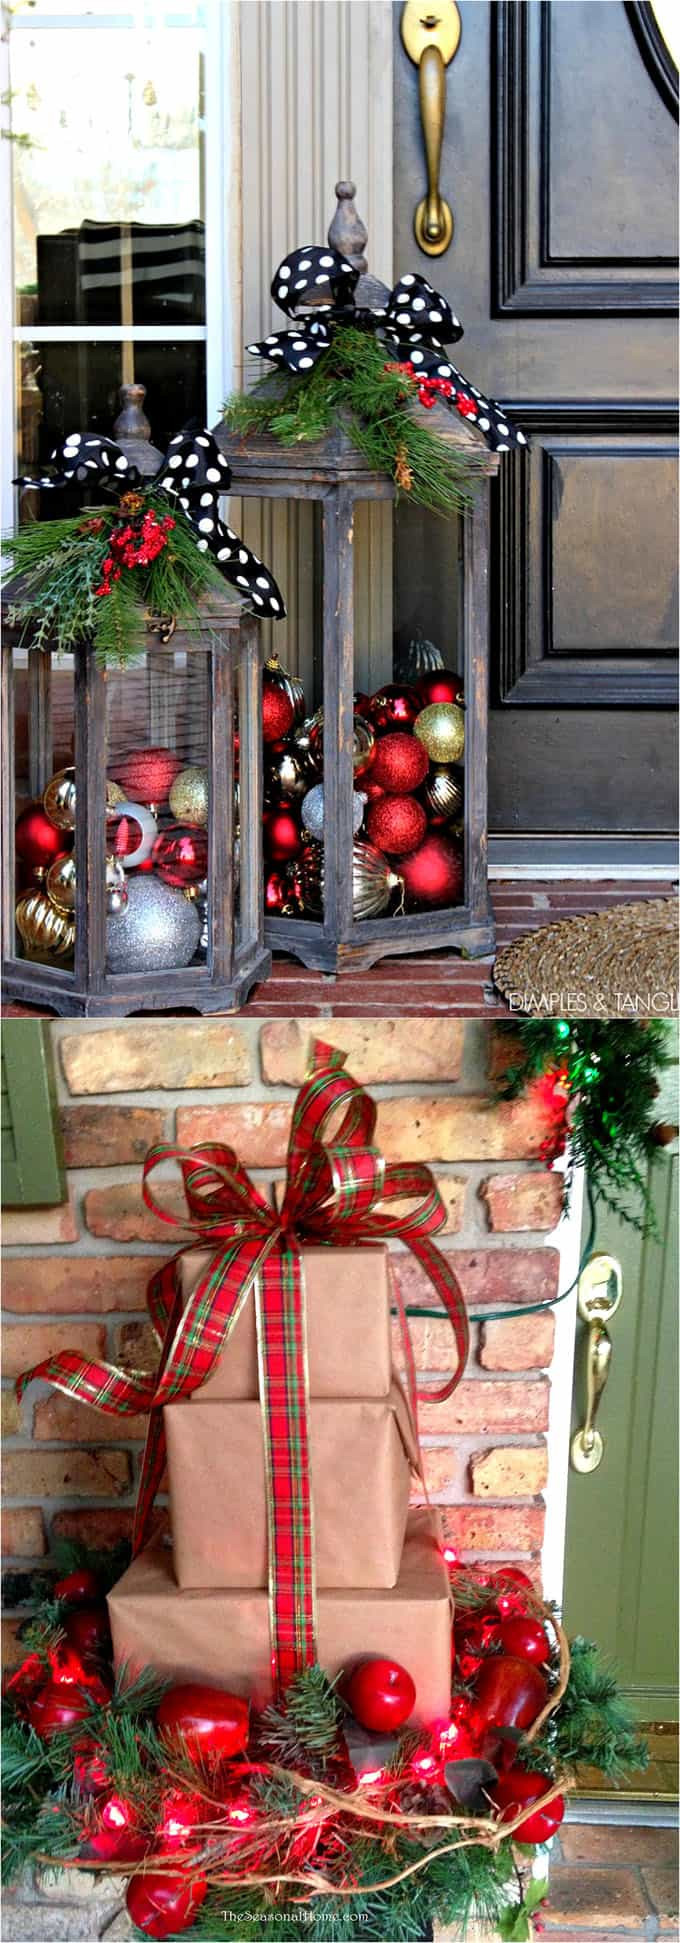 DIY Outdoor Decorations
 Gorgeous Outdoor Christmas Decorations 32 Best Ideas